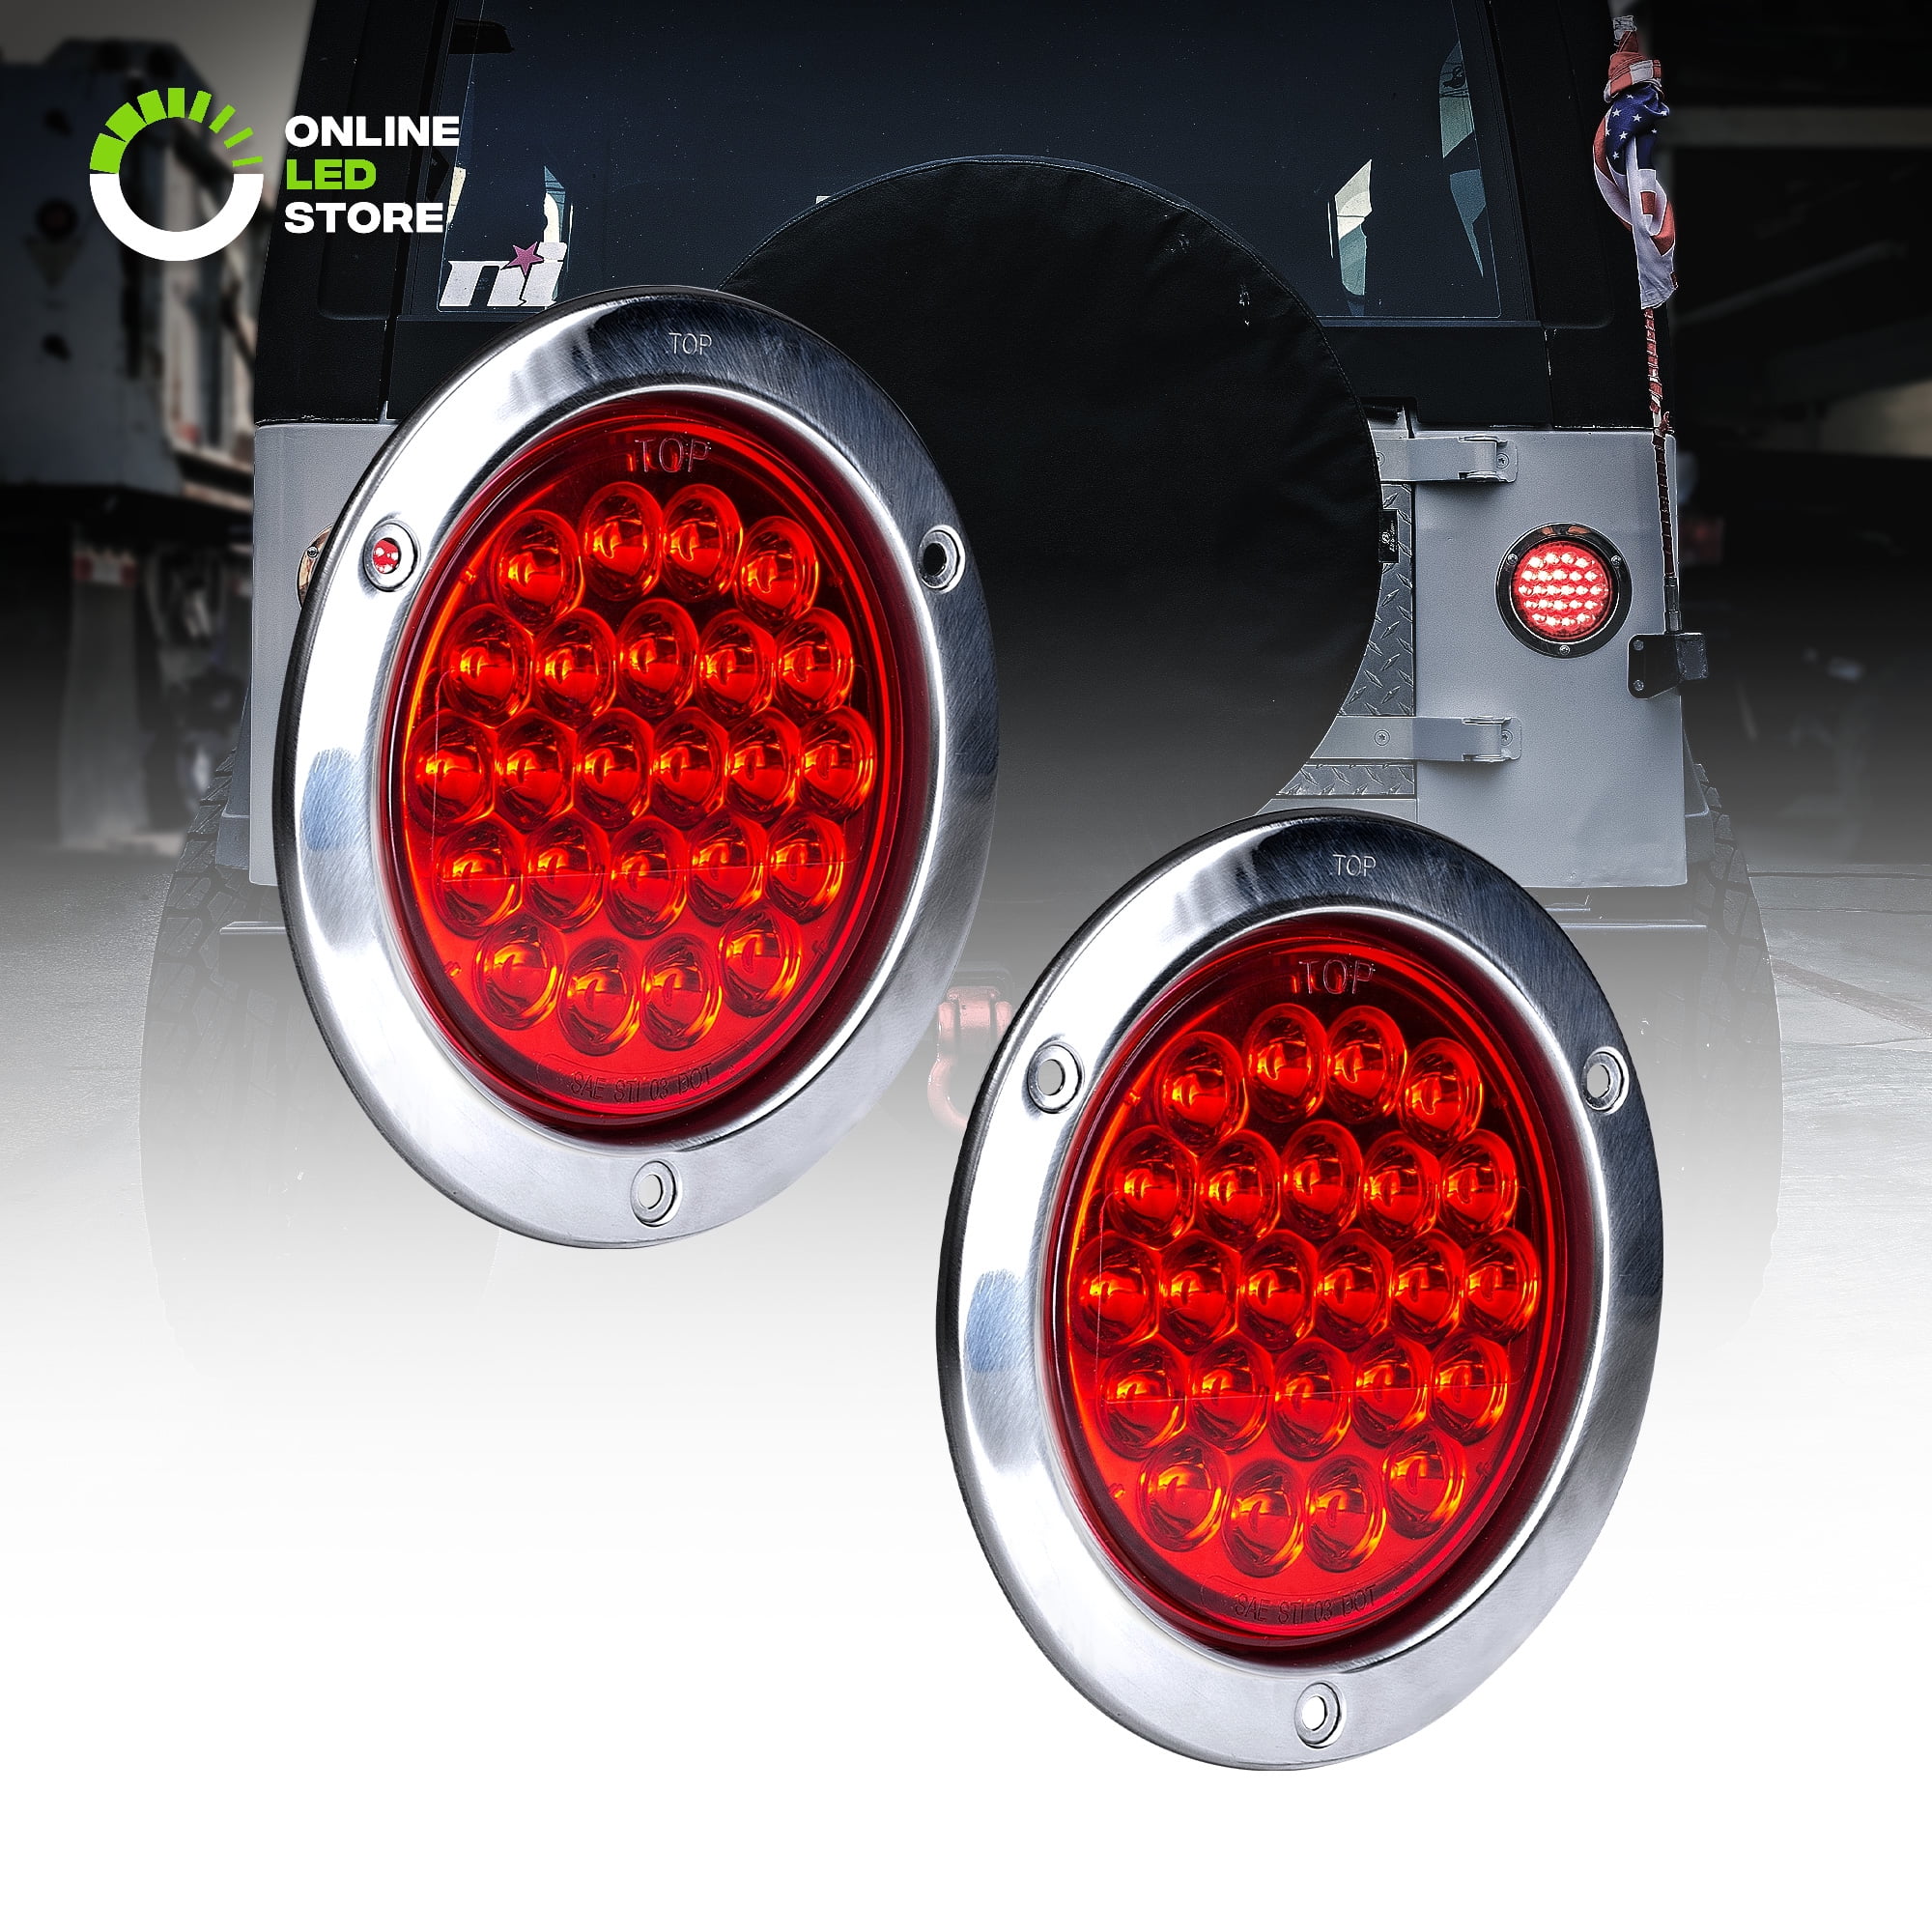 OTOW 4” Round Red LED Trailer Tail Lights with Stainless Steel Bezel/DOT Certified/Grommet & Plug Included/Stop Break Lights for Trucks Jeeps RVs Boats Turn 1 Pair 